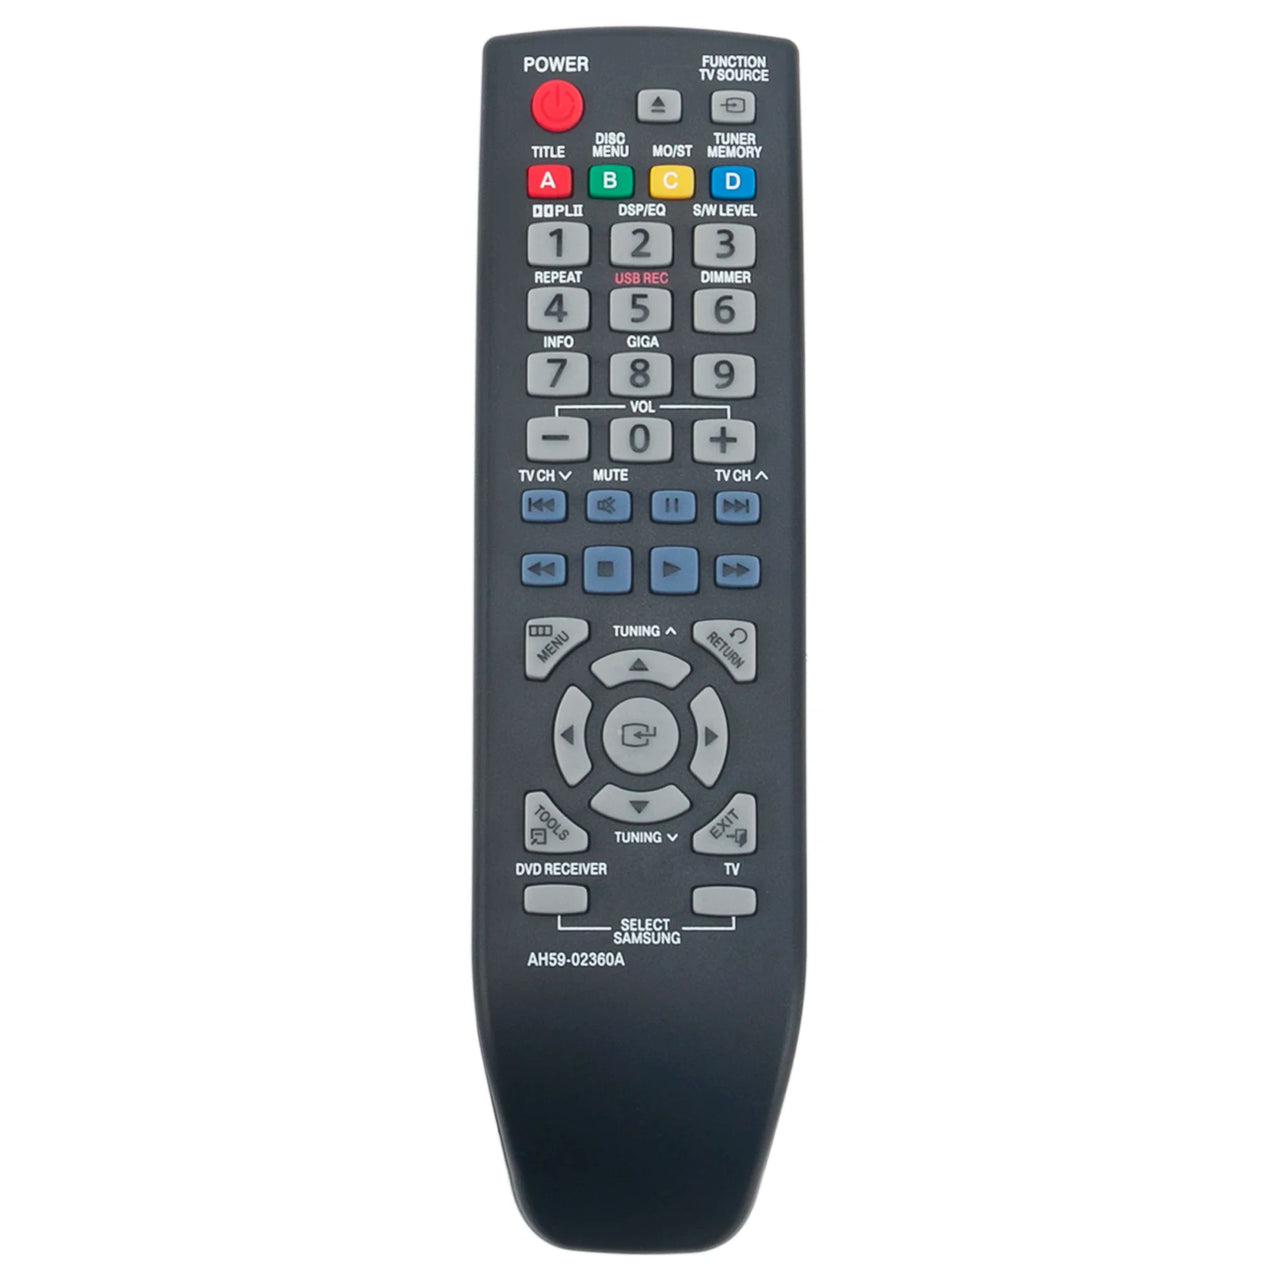 AH59-02360A Replacement Remote Control for Samsung TV DVD Players